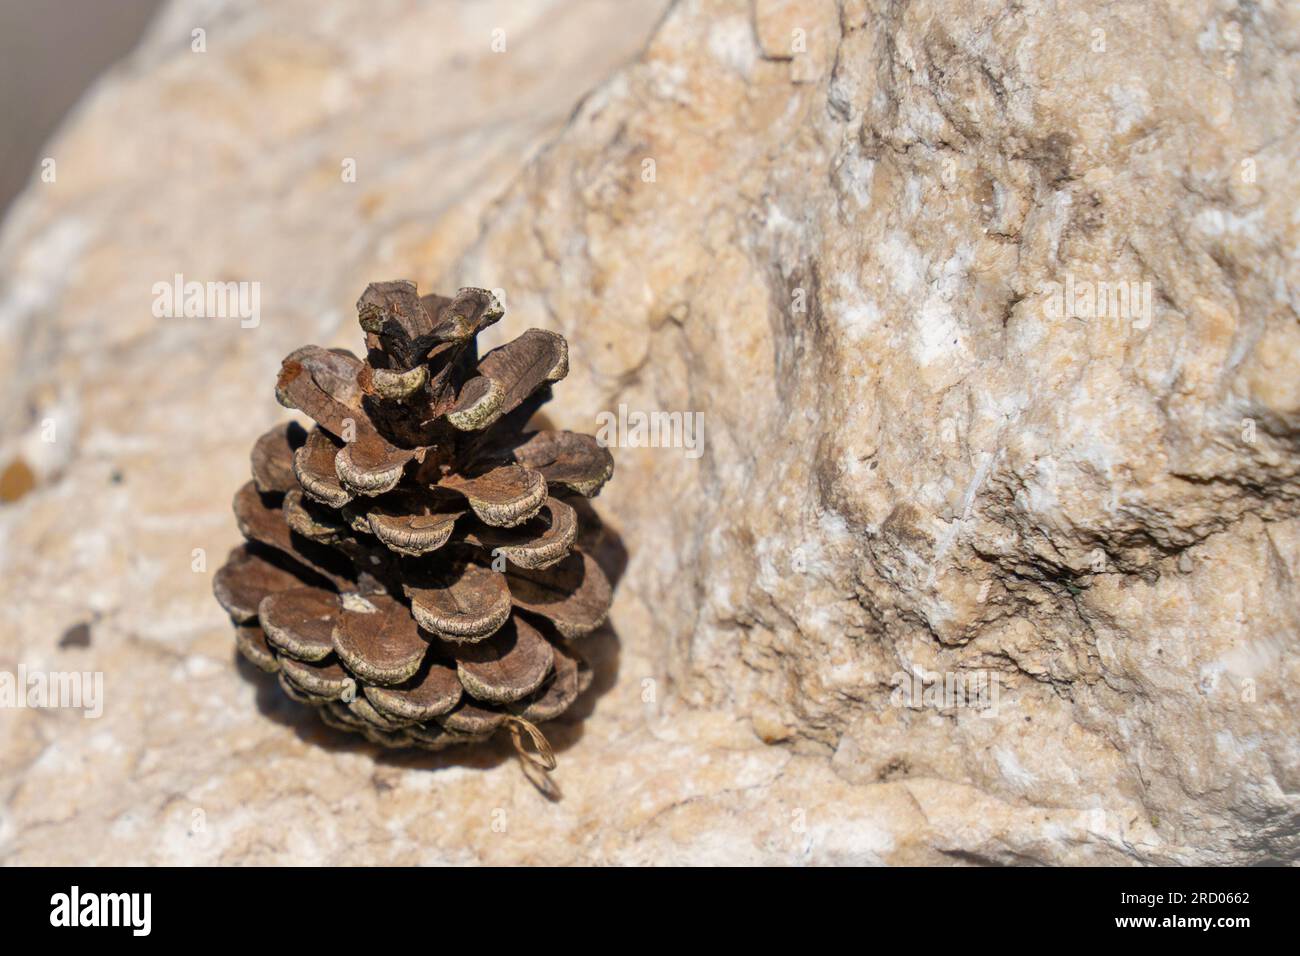 Pine cone on a rock in the summer sun Stock Photo